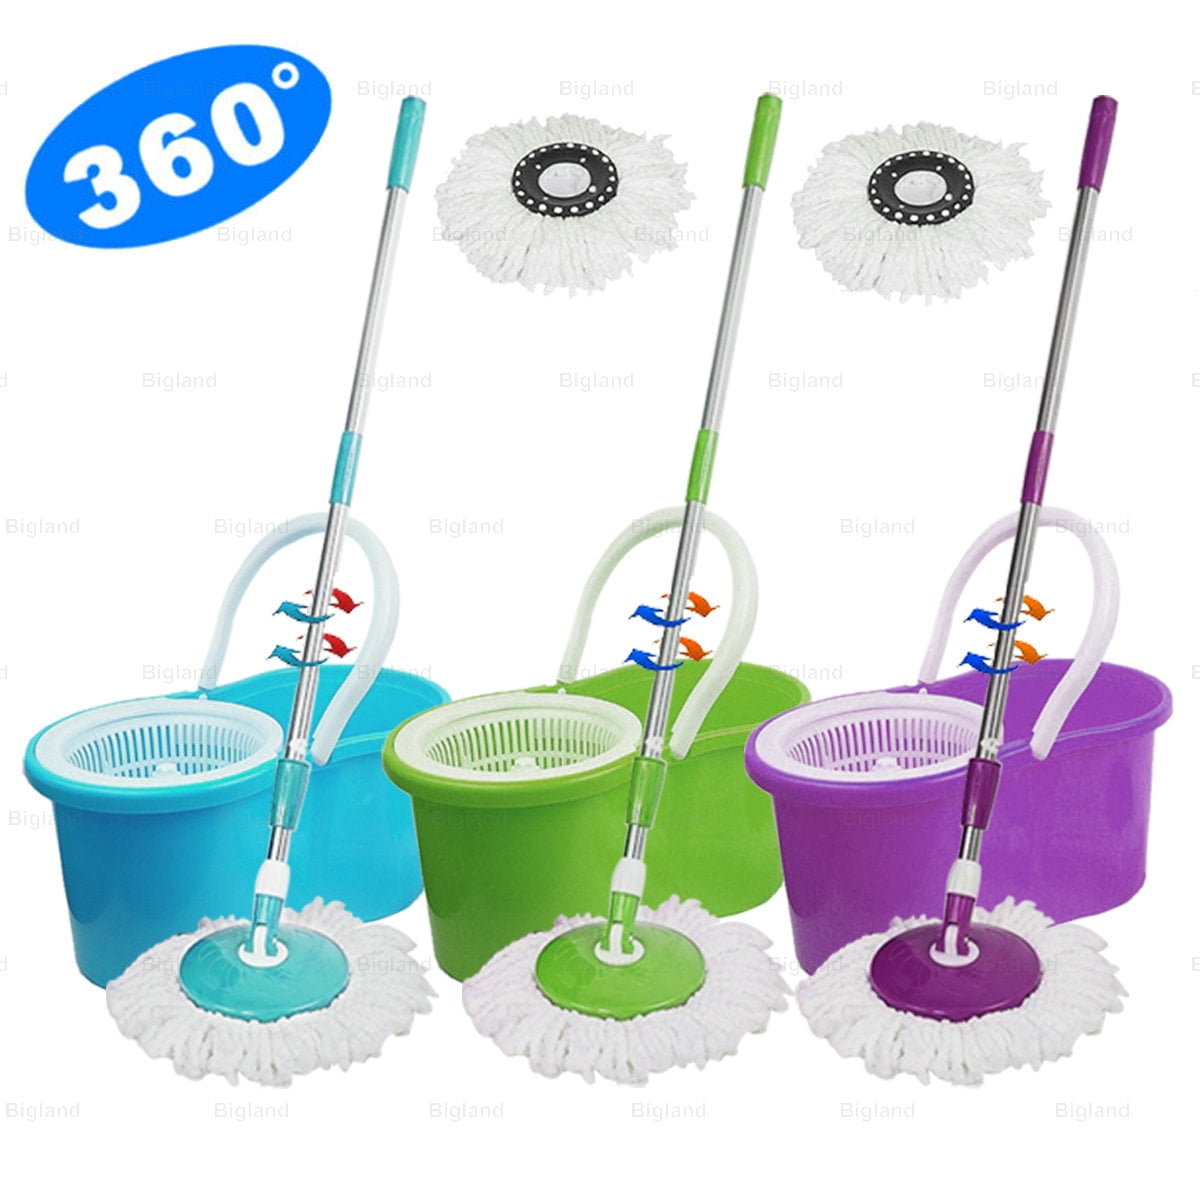 Magic Rotating Spinning 360° Microfiber Mop Bucket Floor Cleaner Home Cleaning 